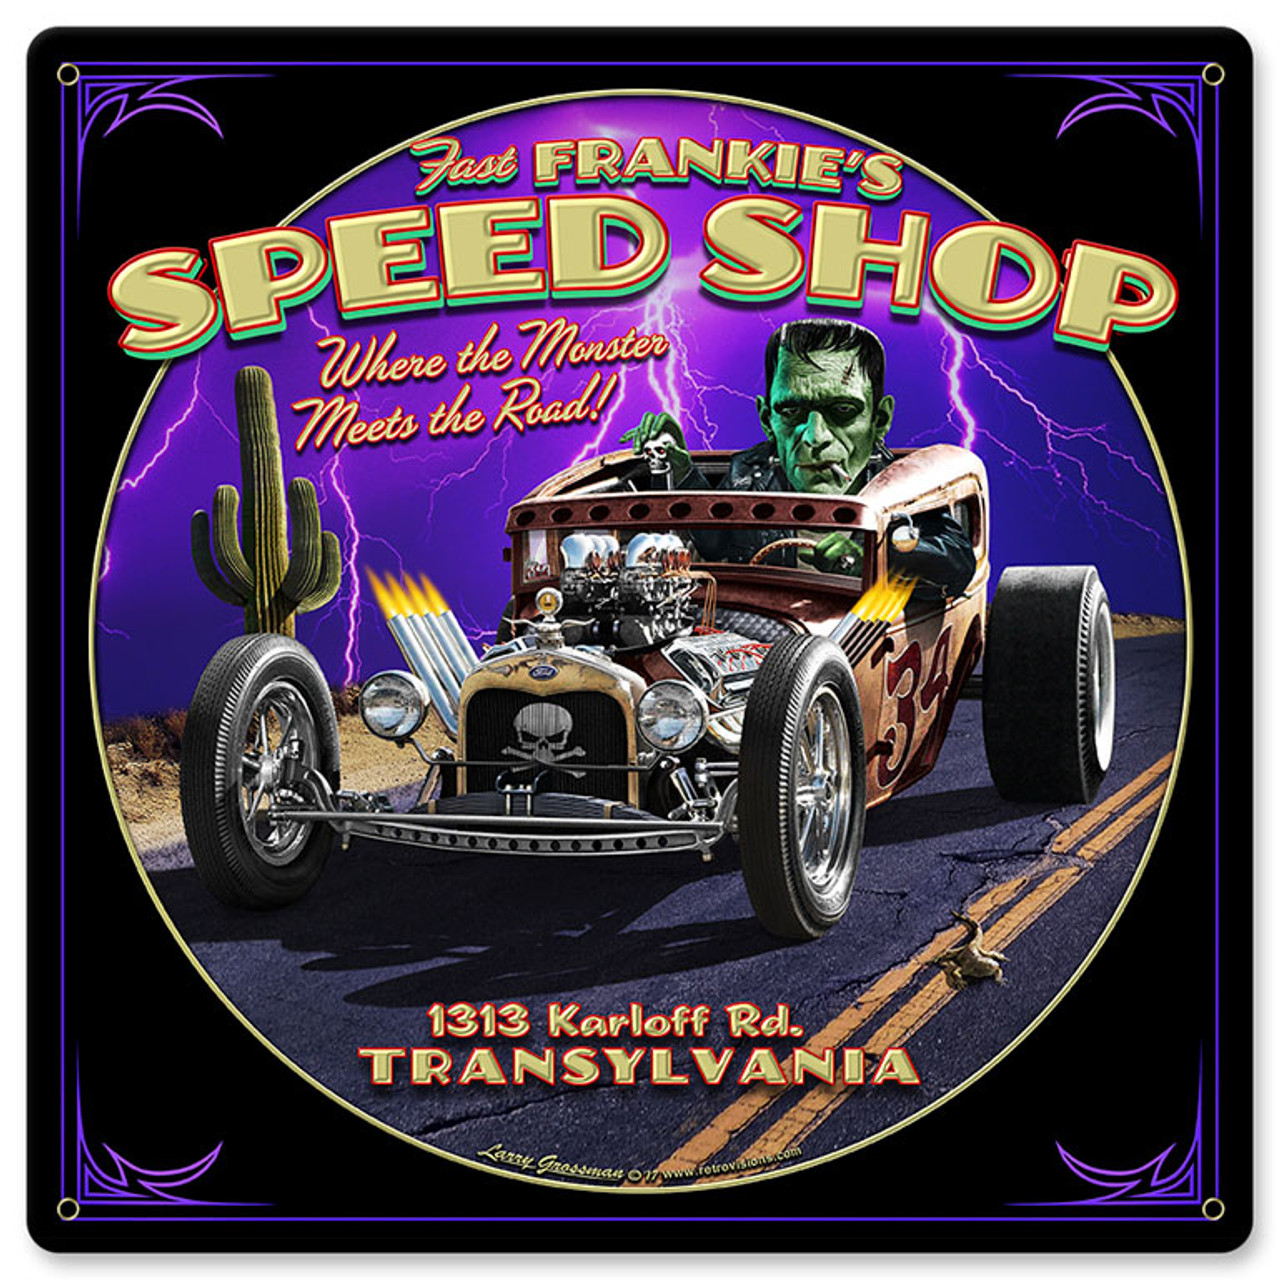 Frankies Speed Shop Metal Sign 12 x 12 Inches